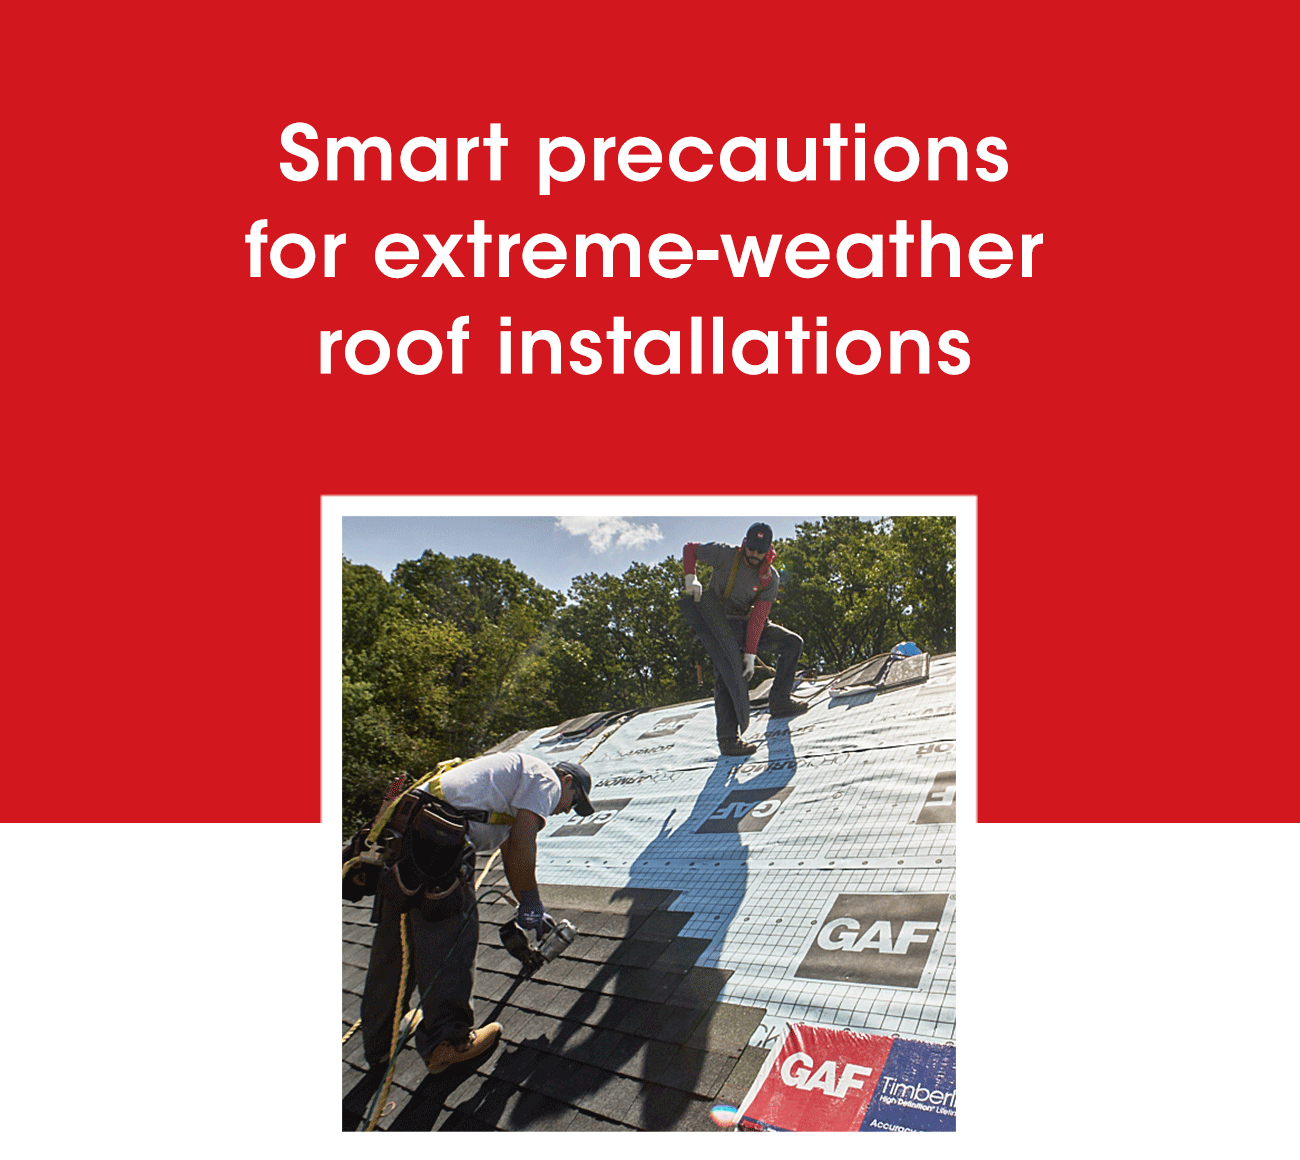 Smart precautions for extreme-weather roof installations